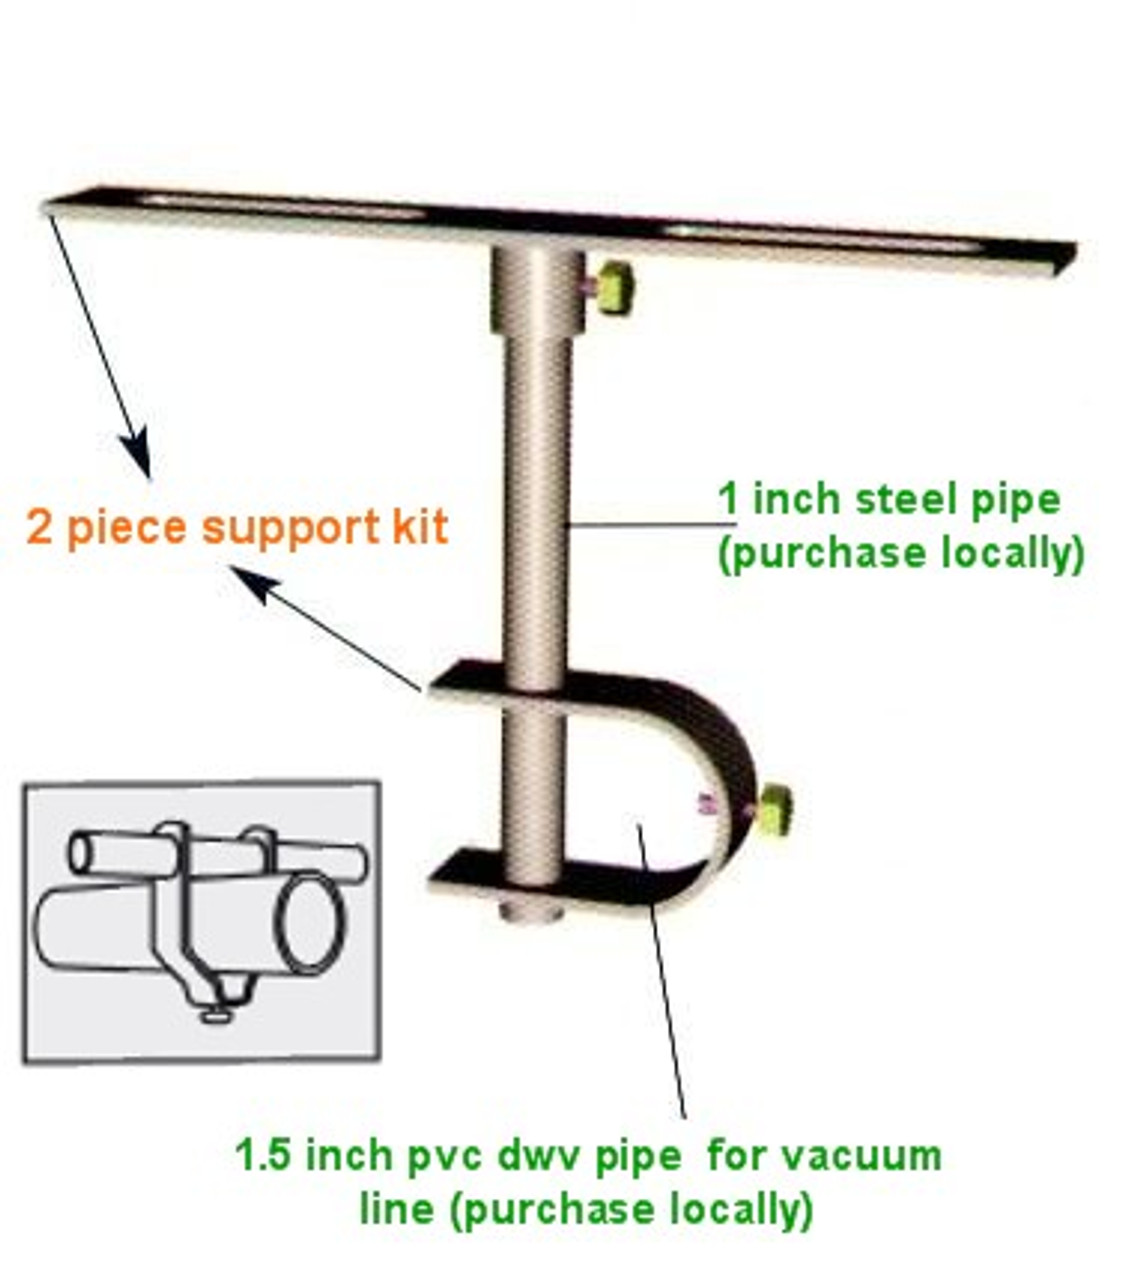 Bracket for wall / ceiling mount